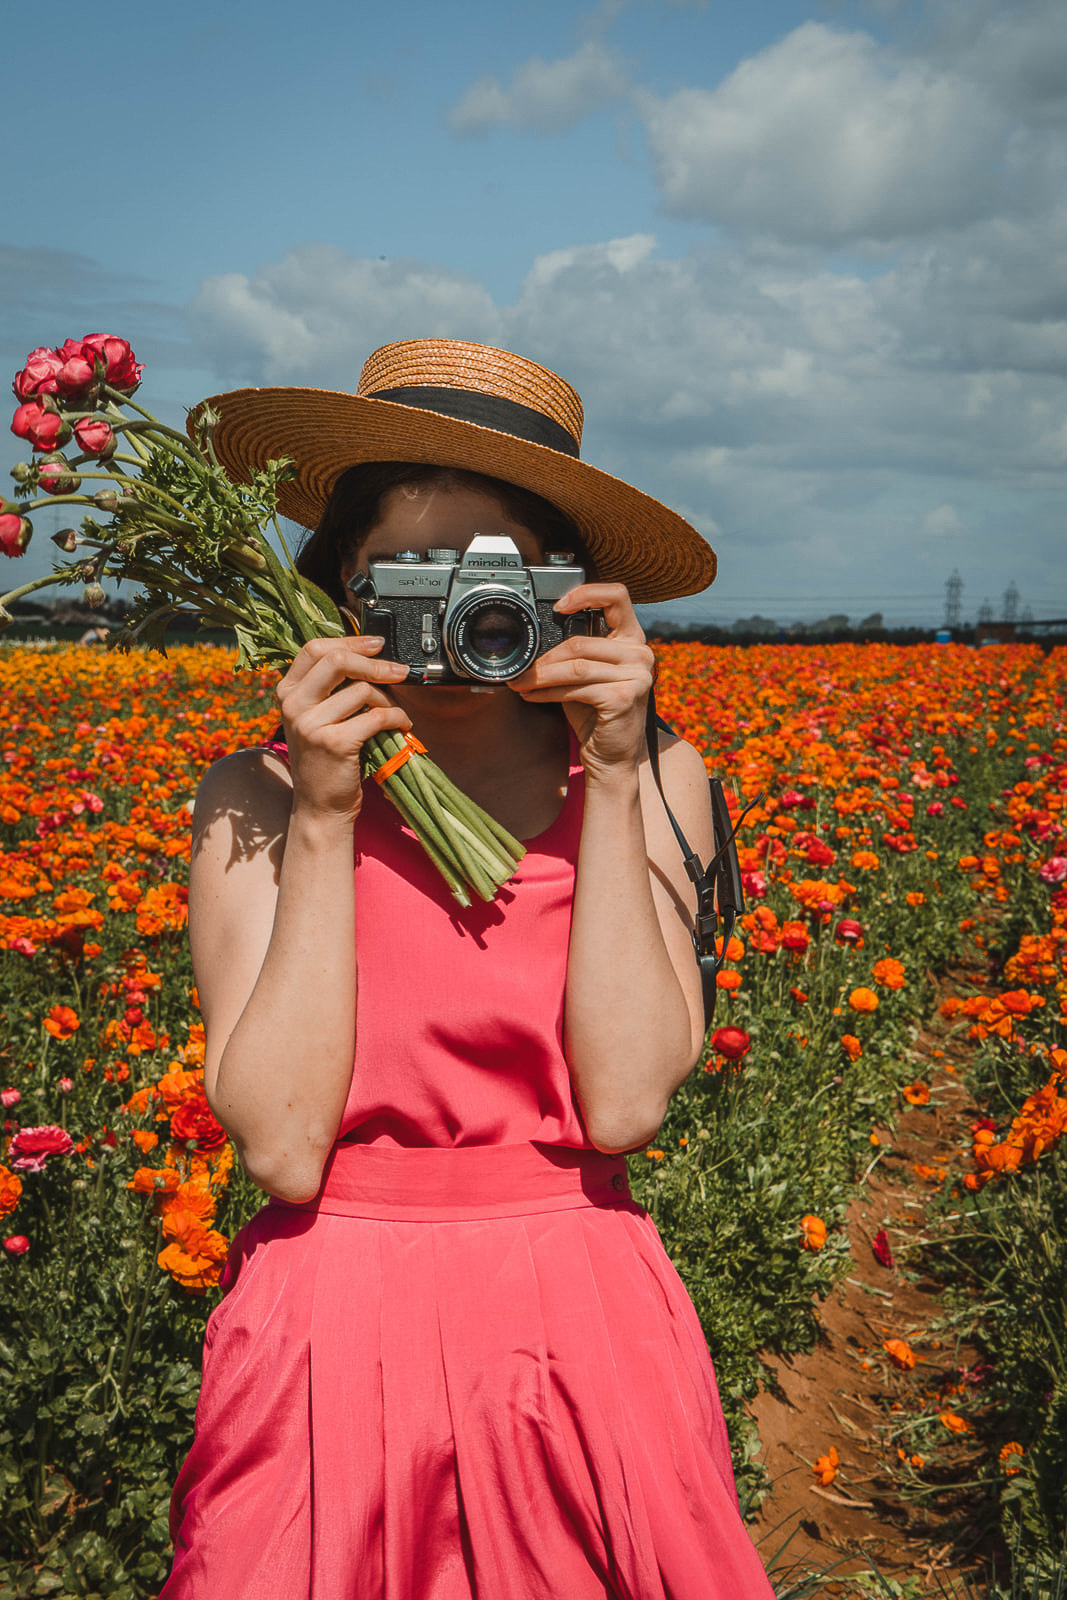 How to pose at a flower field, posing with flowers, flower field photoshoot, flower field photoshoot poses inspo, flower photoshoot, posing with a vintage camera - Palm Trees and Pellegrino